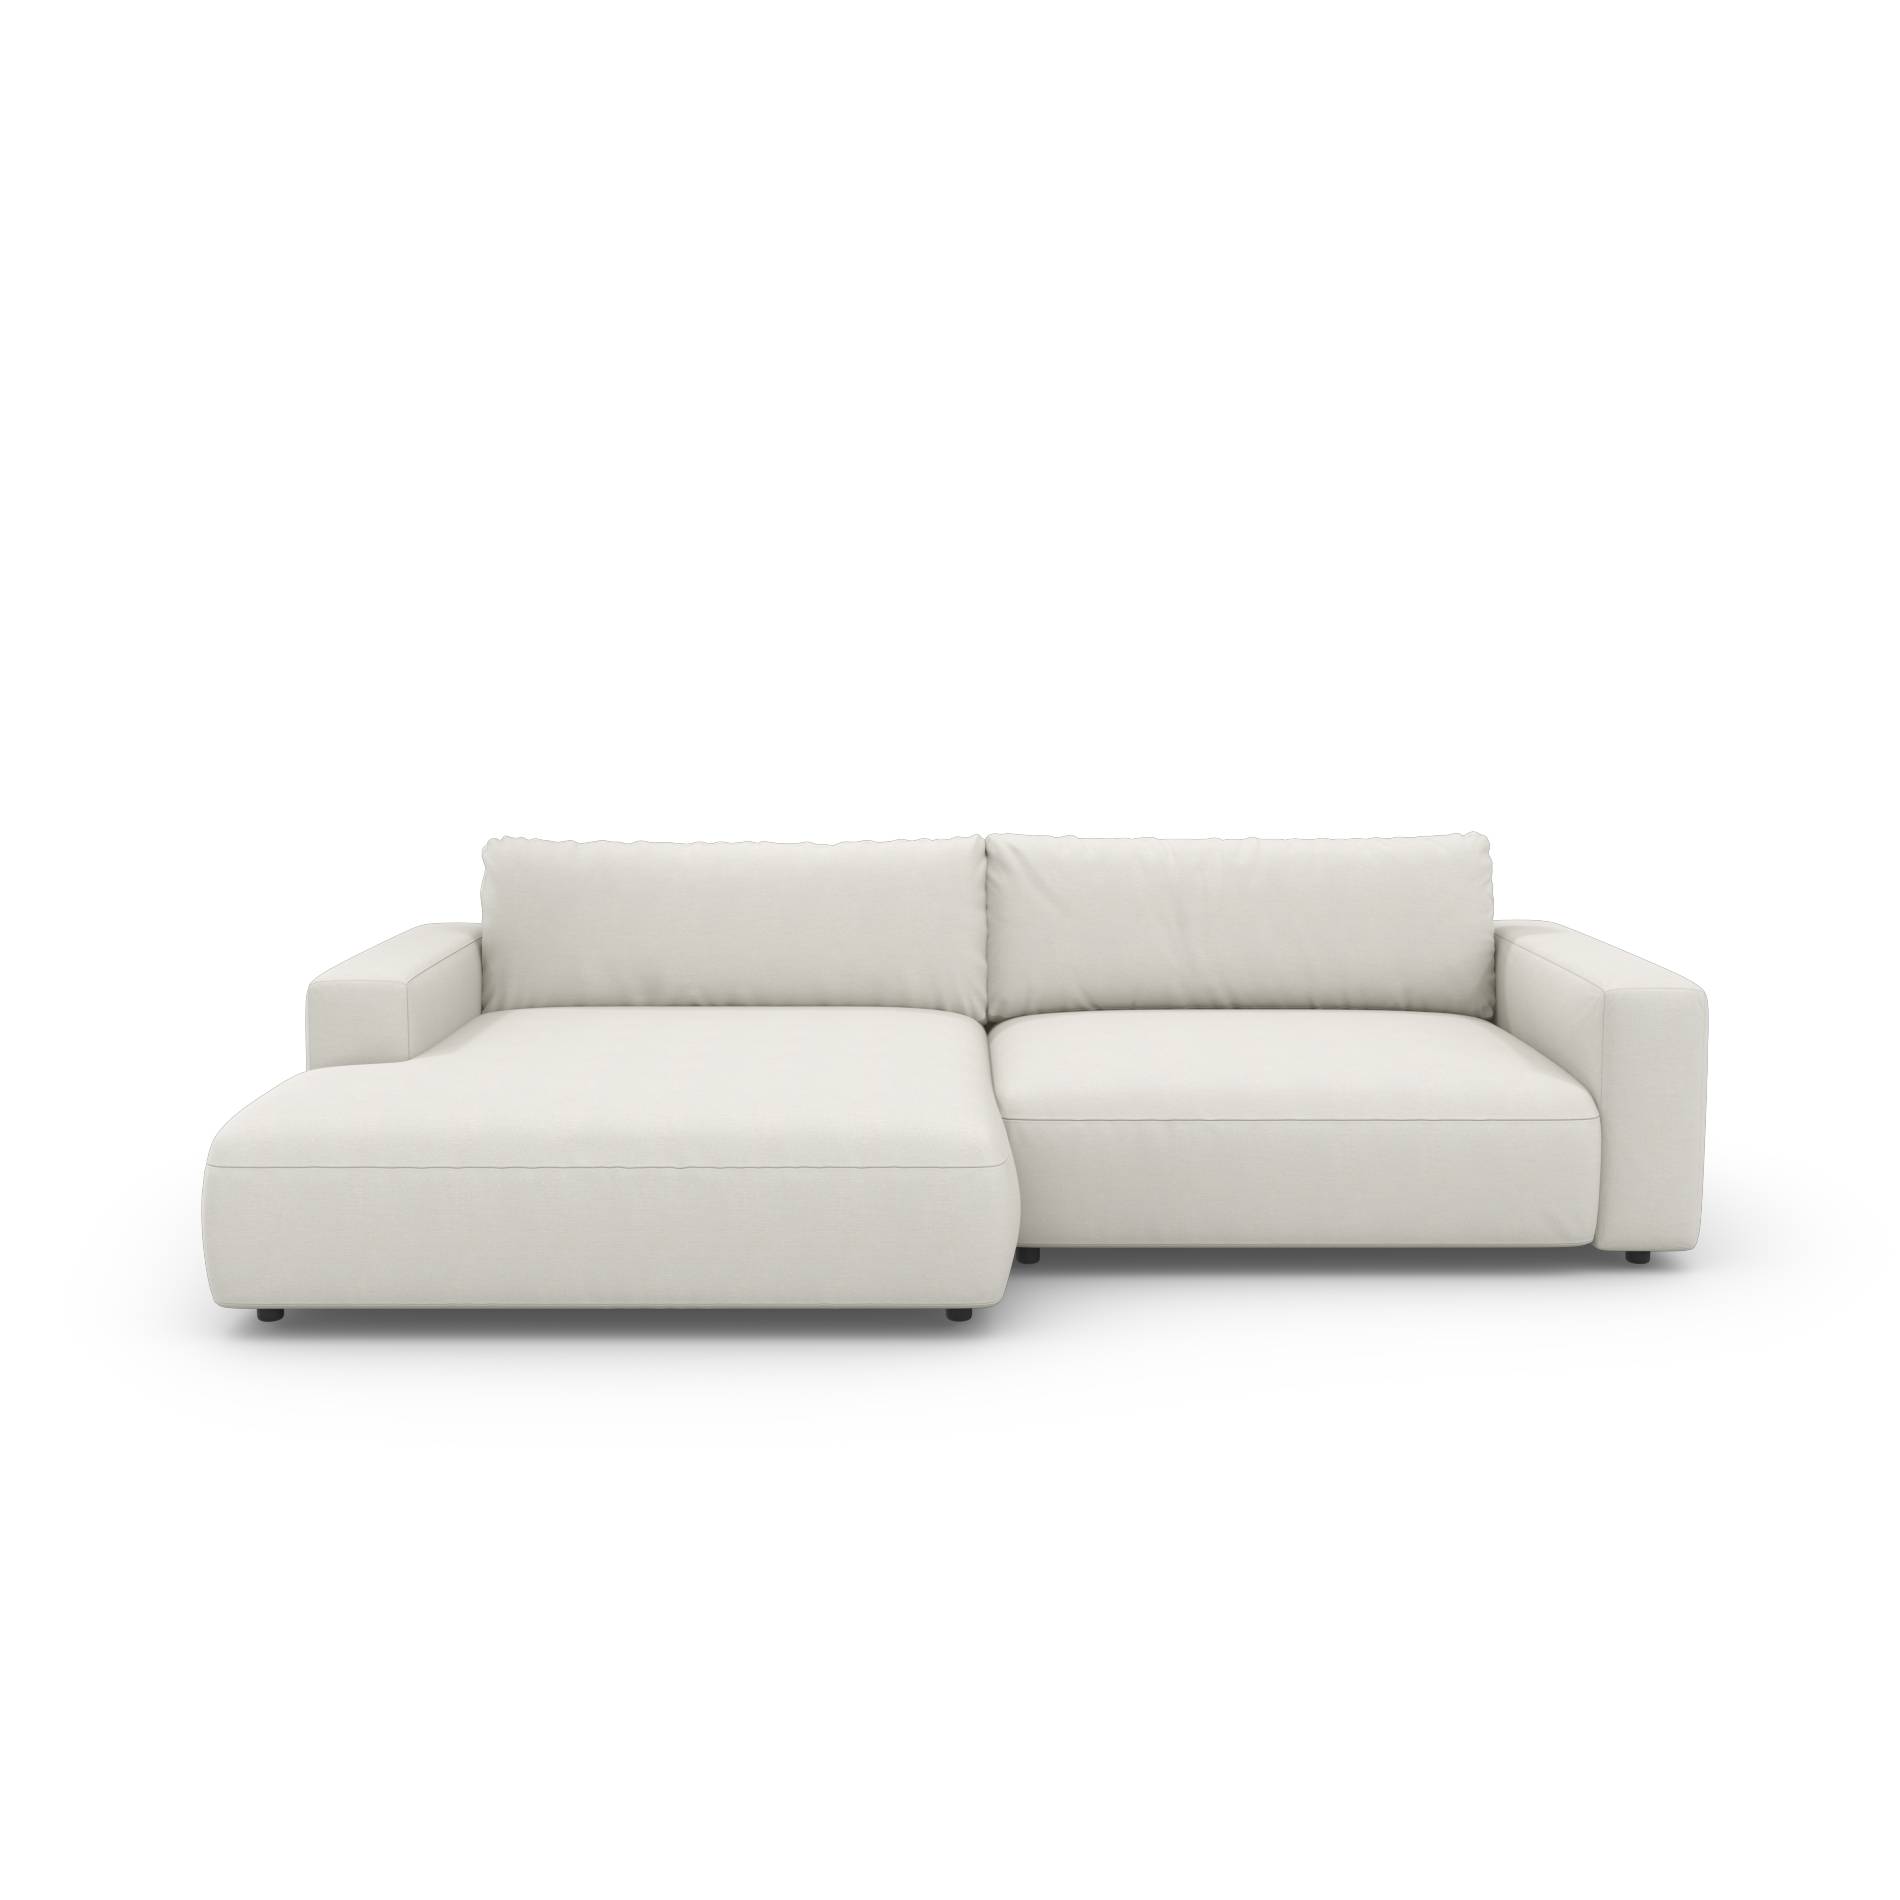 Musterring by Lucia M Gallery branded Sofa